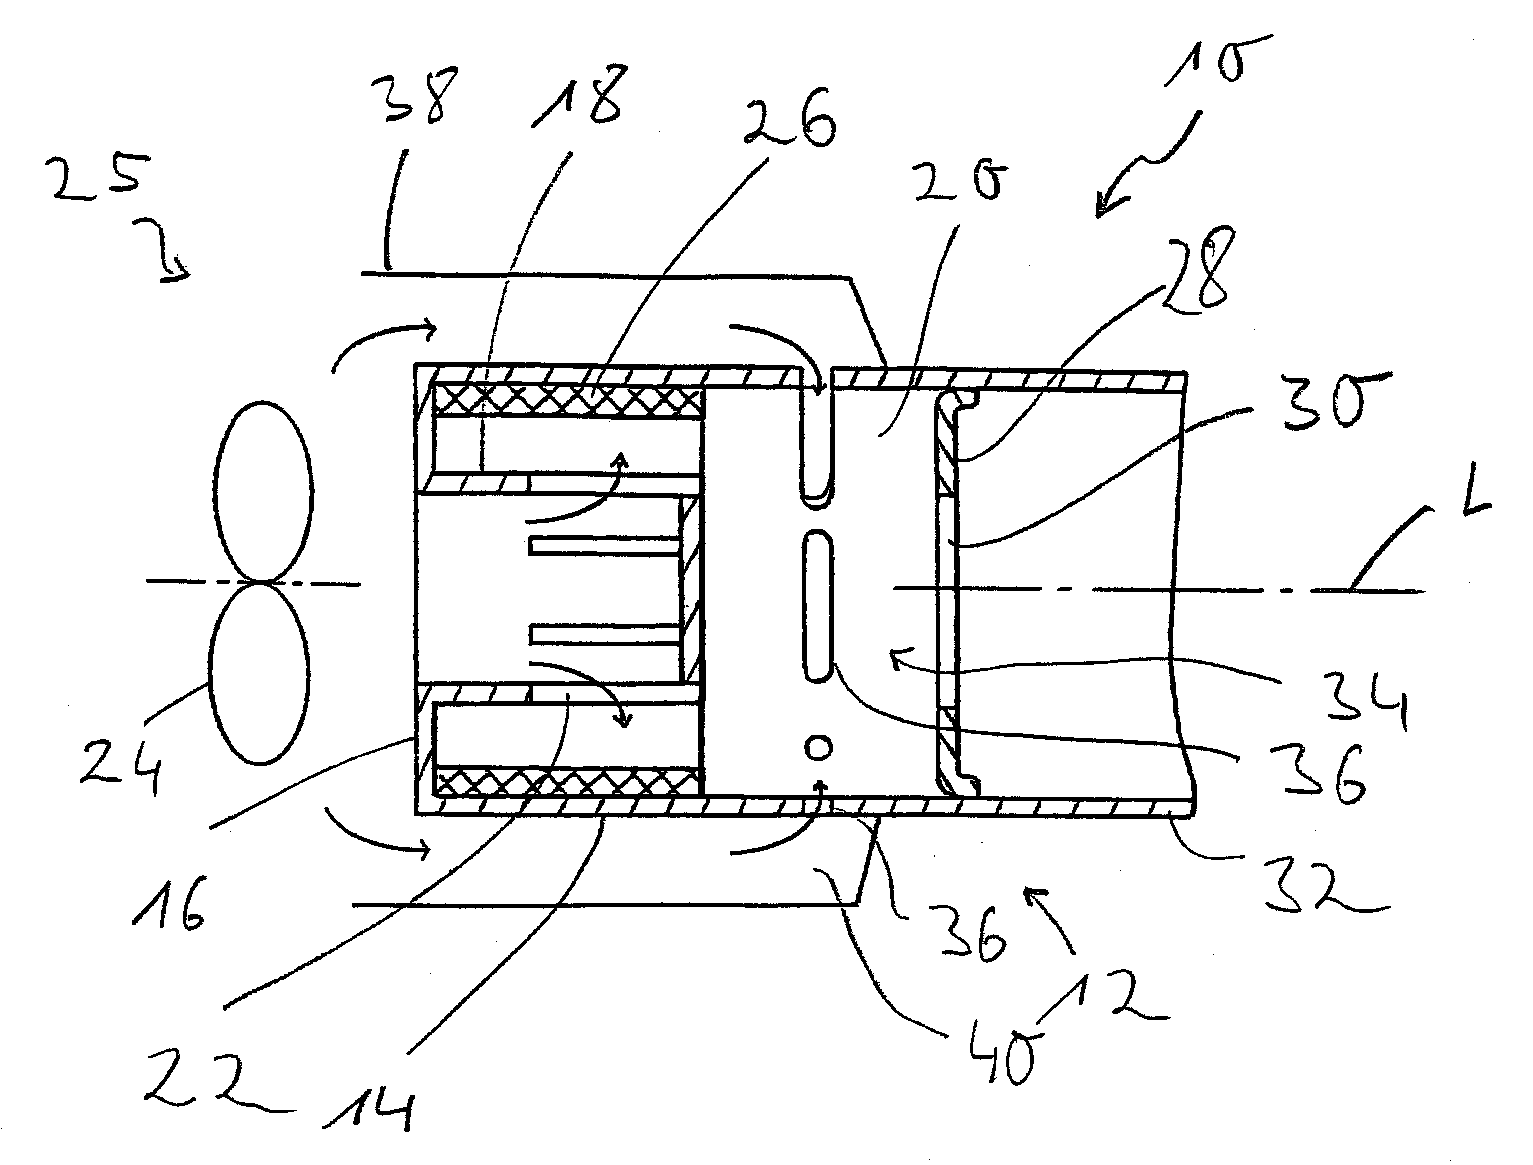 Evaporator assembly unit, especially for a vehicle heater or a reformer arrangement of a fuel cell system